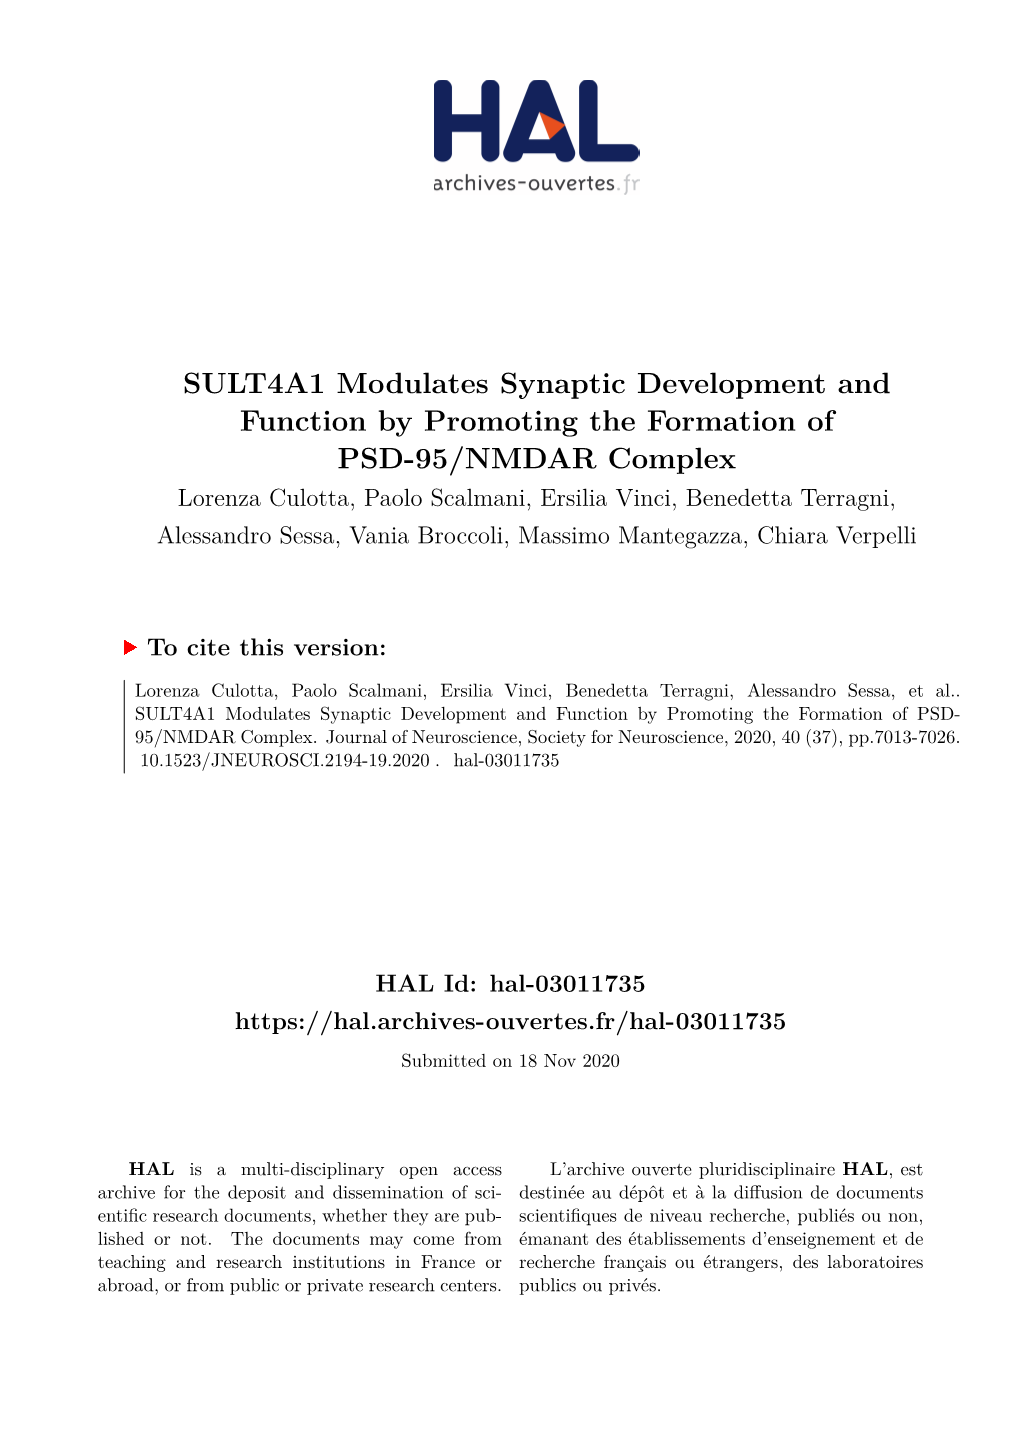 SULT4A1 Modulates Synaptic Development and Function By